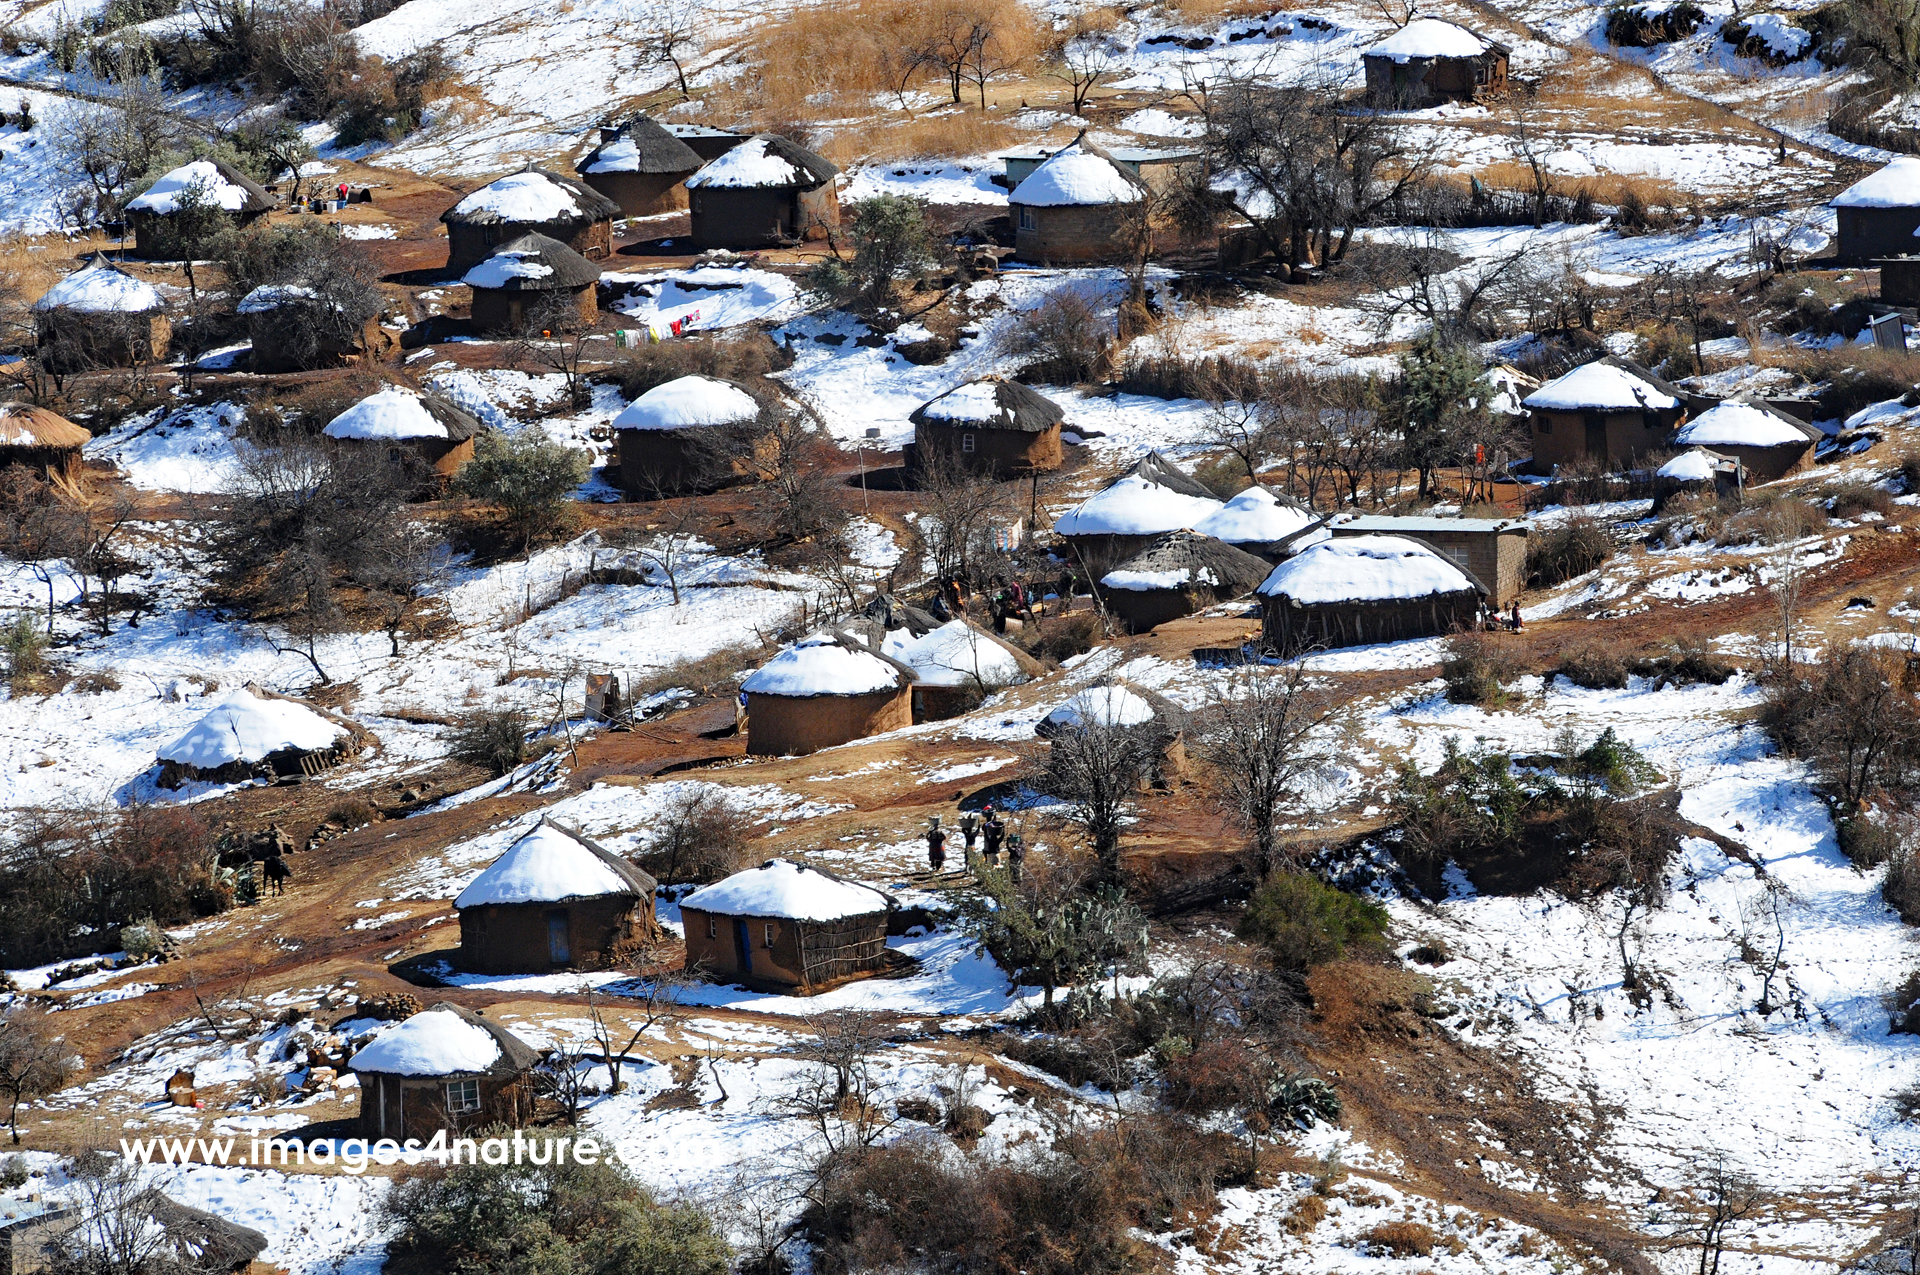 View of a village with typical round stone houses in the remote rural Lesotho highlands in winter